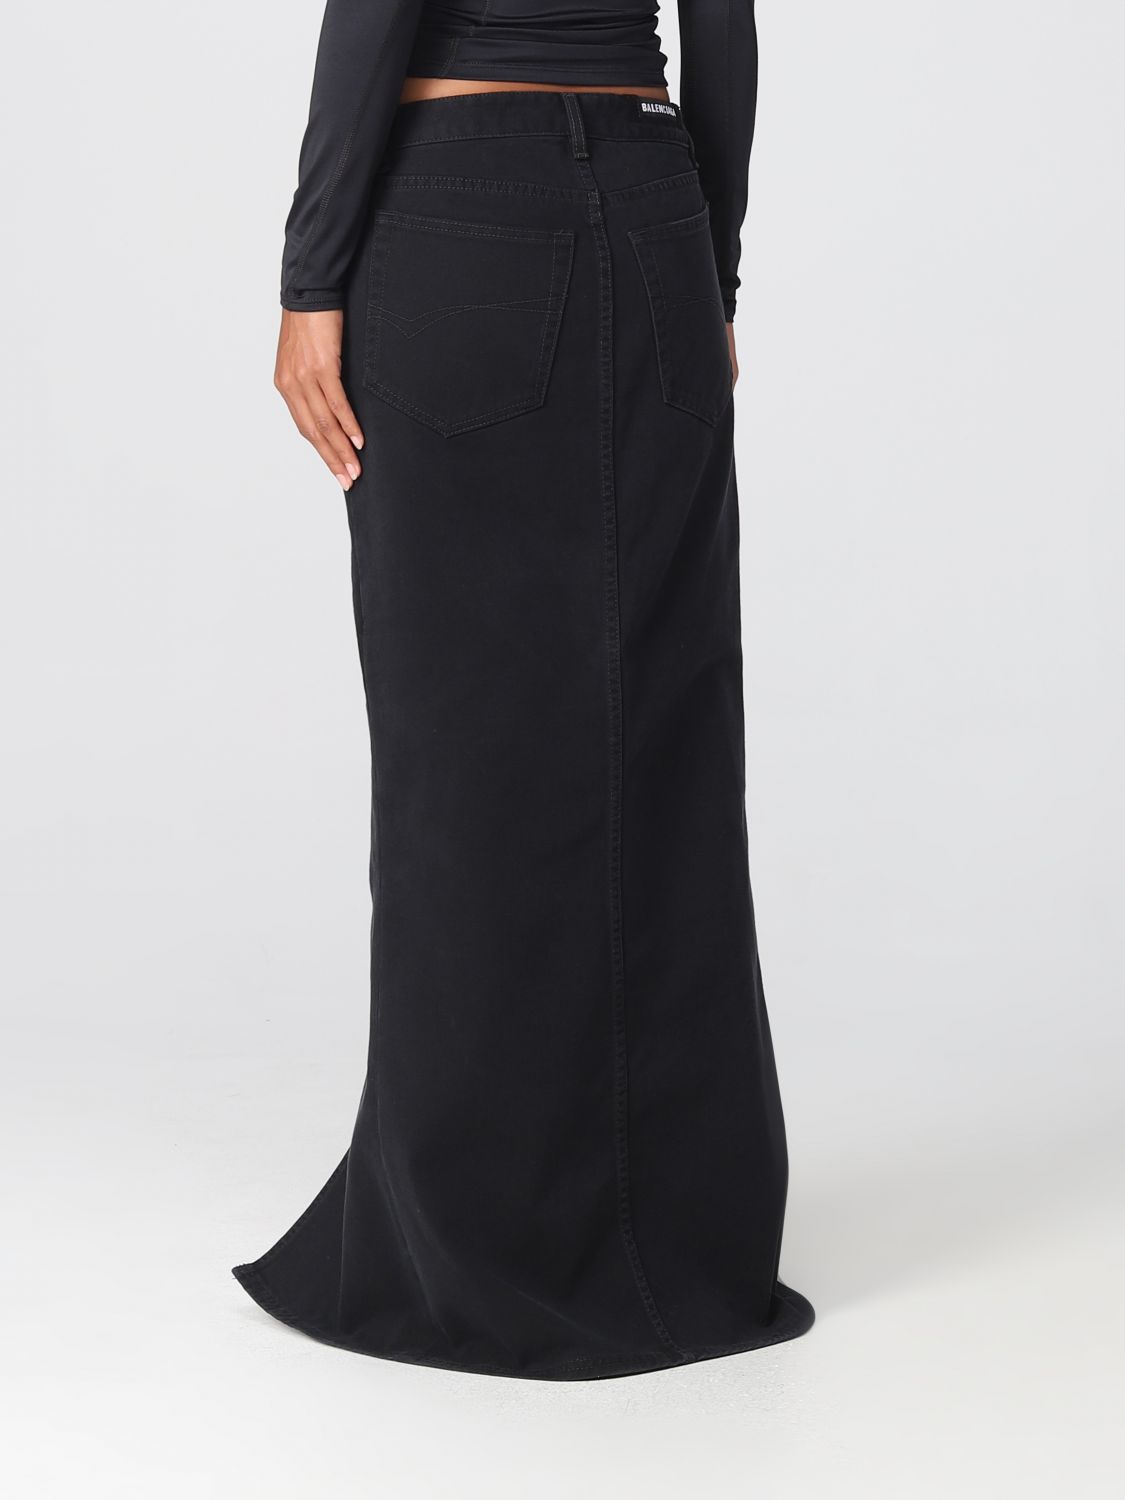 Full length Maxi Skirts for Women in black color | FASHIOLA.ph